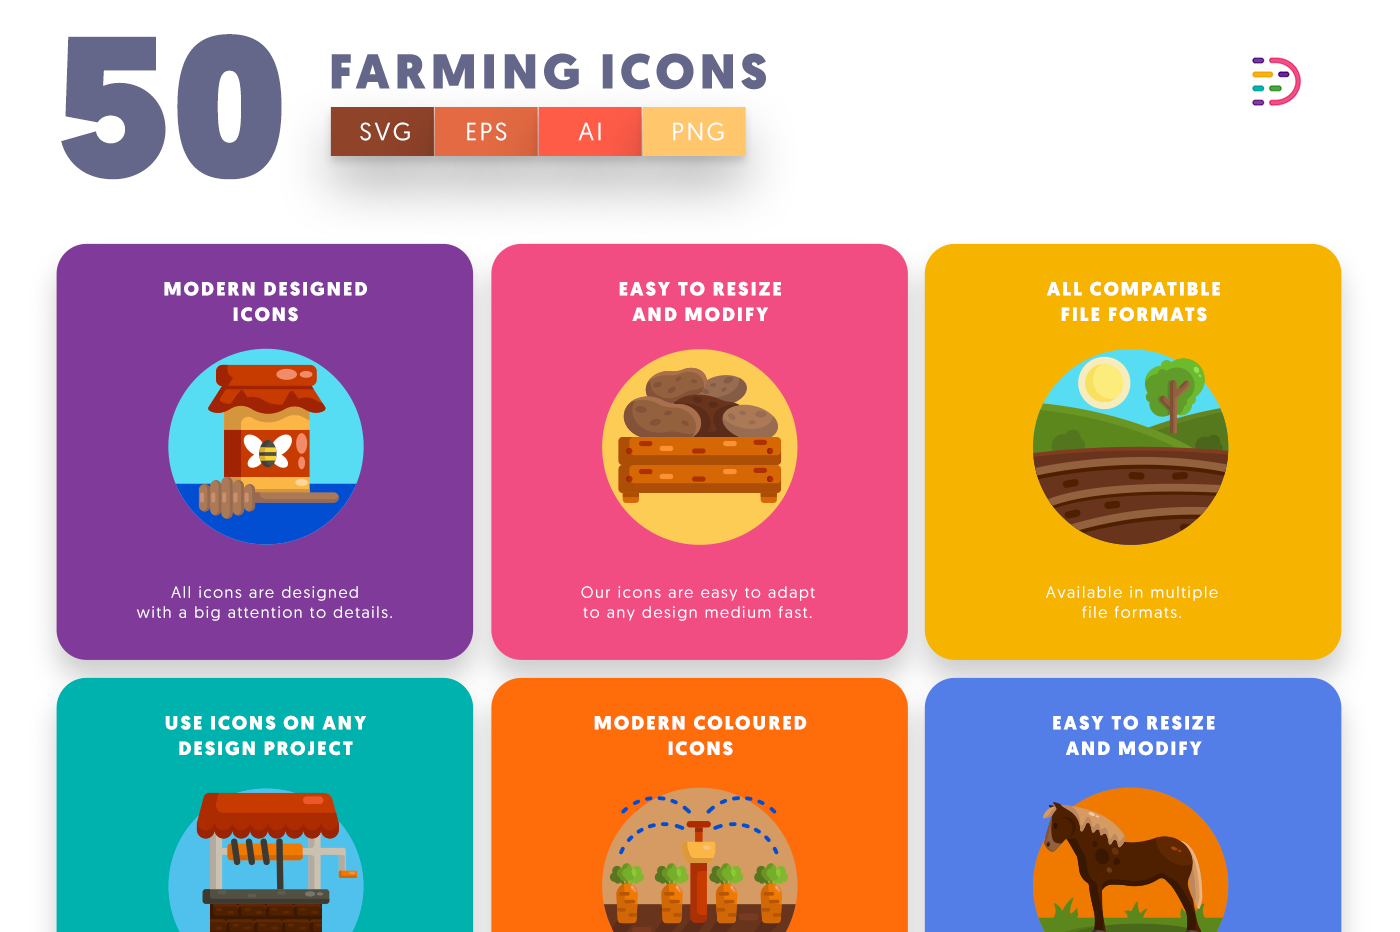  Farming Icons with colored backgrounds 